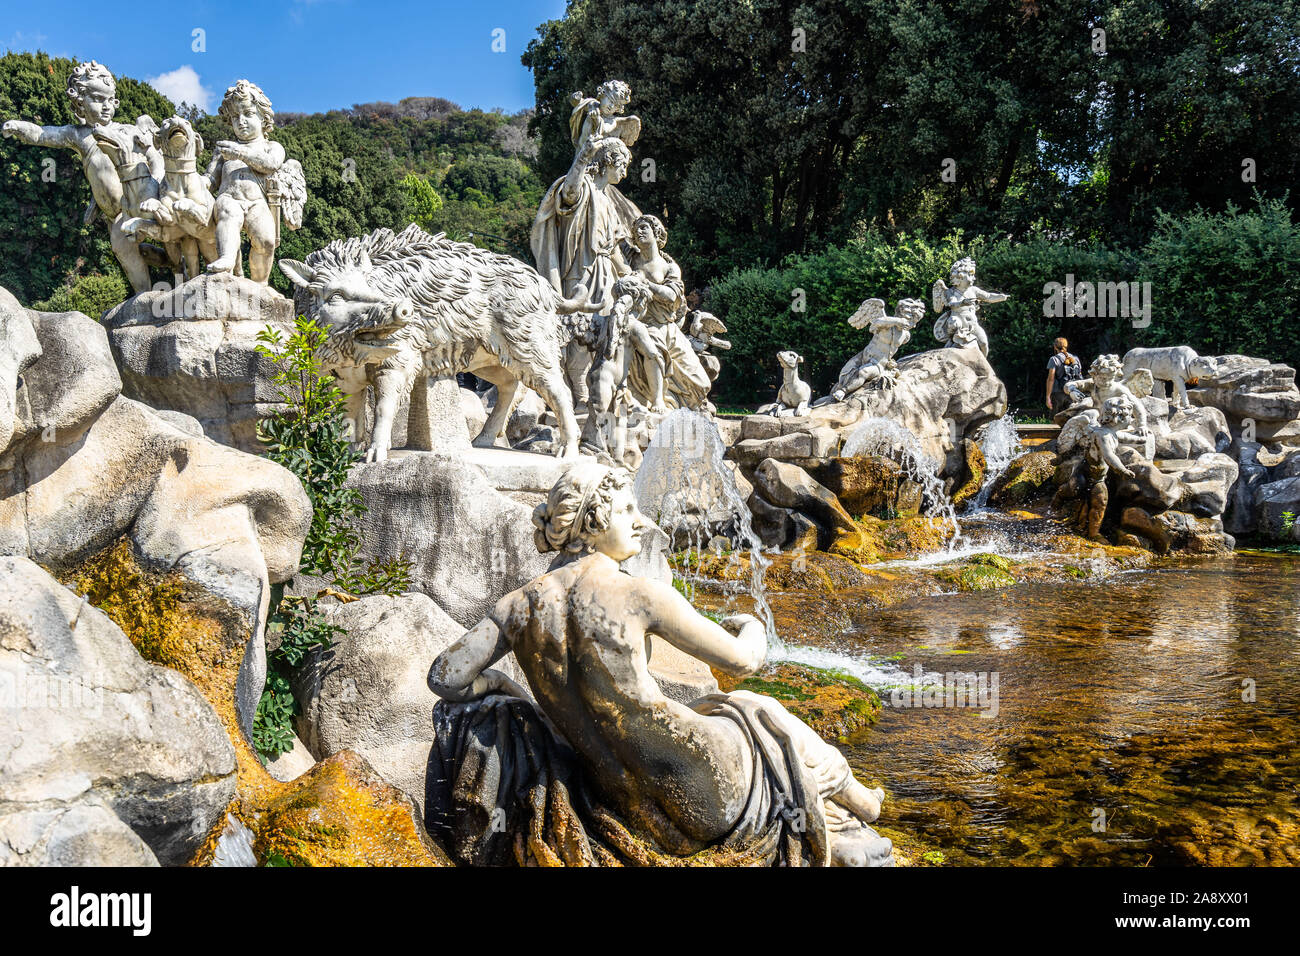 Group of marble sculptures of the fountain of Venere e Adone at Caserta Royal Palace, Campania, Italy, Campania, Italy Stock Photo